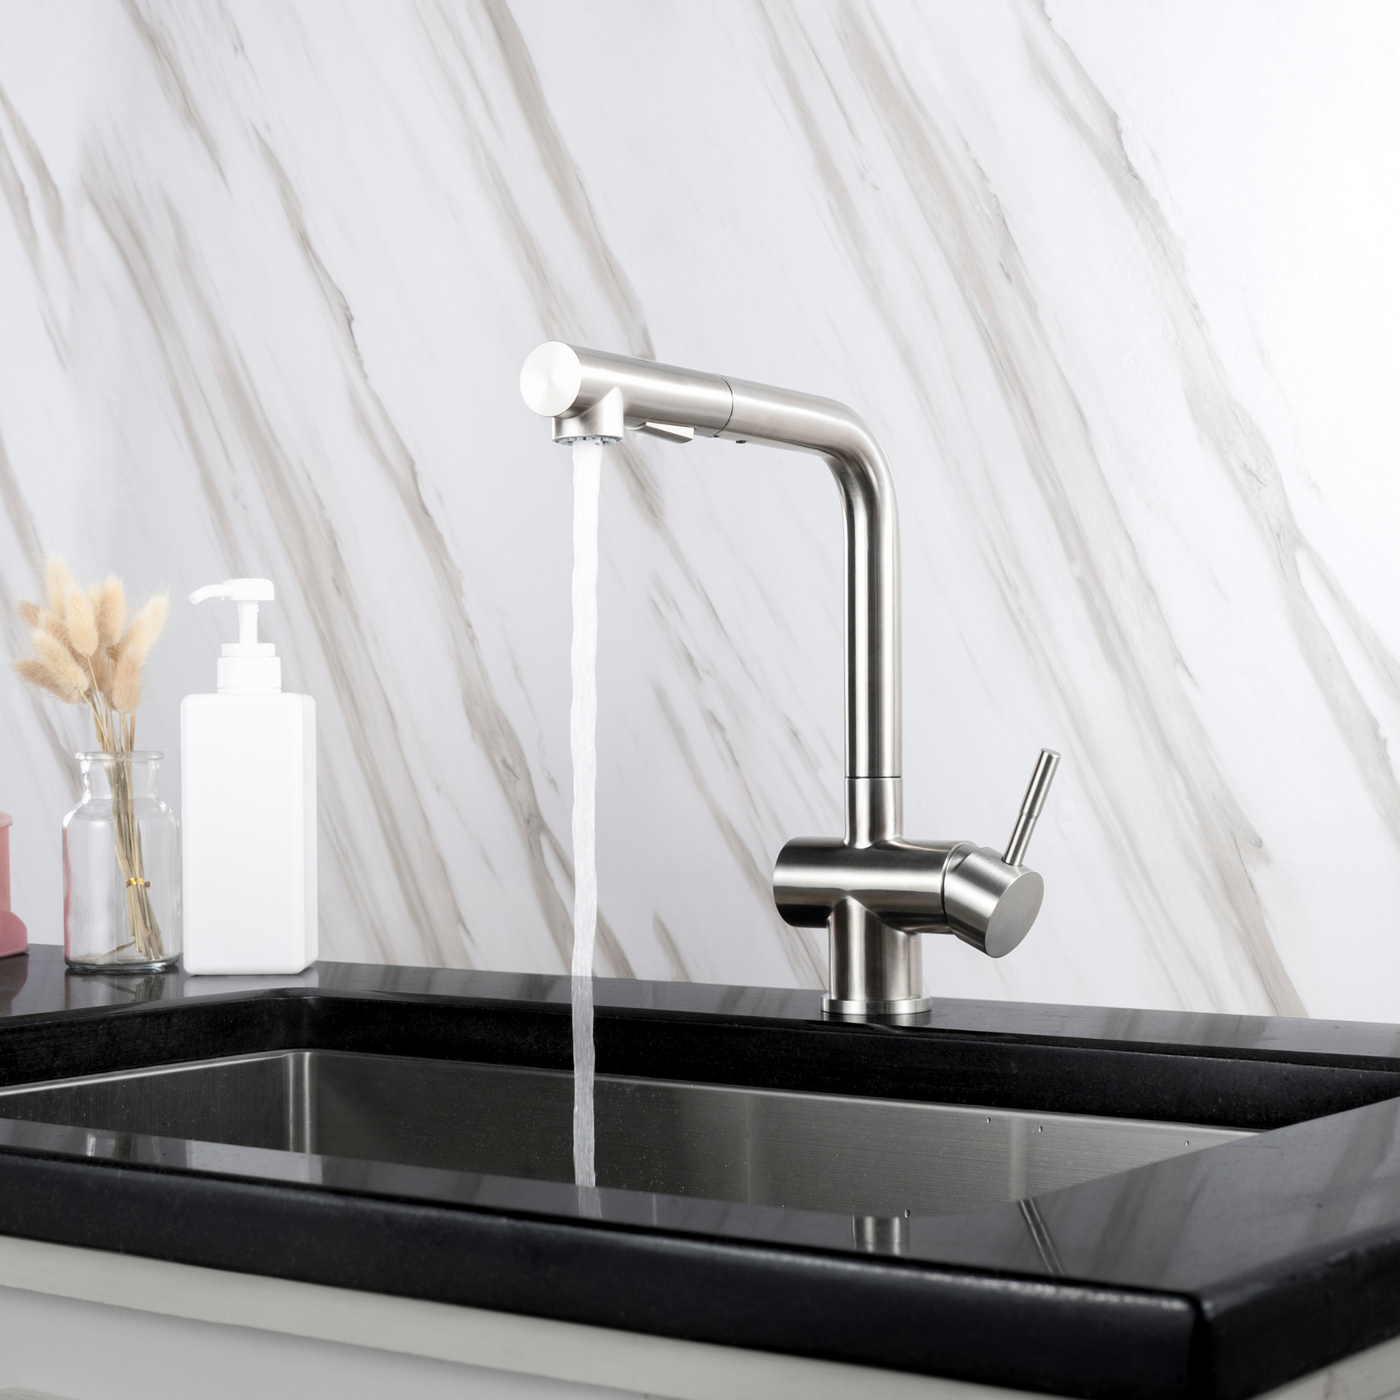 Style Single-Handle Kitchen Sink Faucet with Pull-Down Sprayer